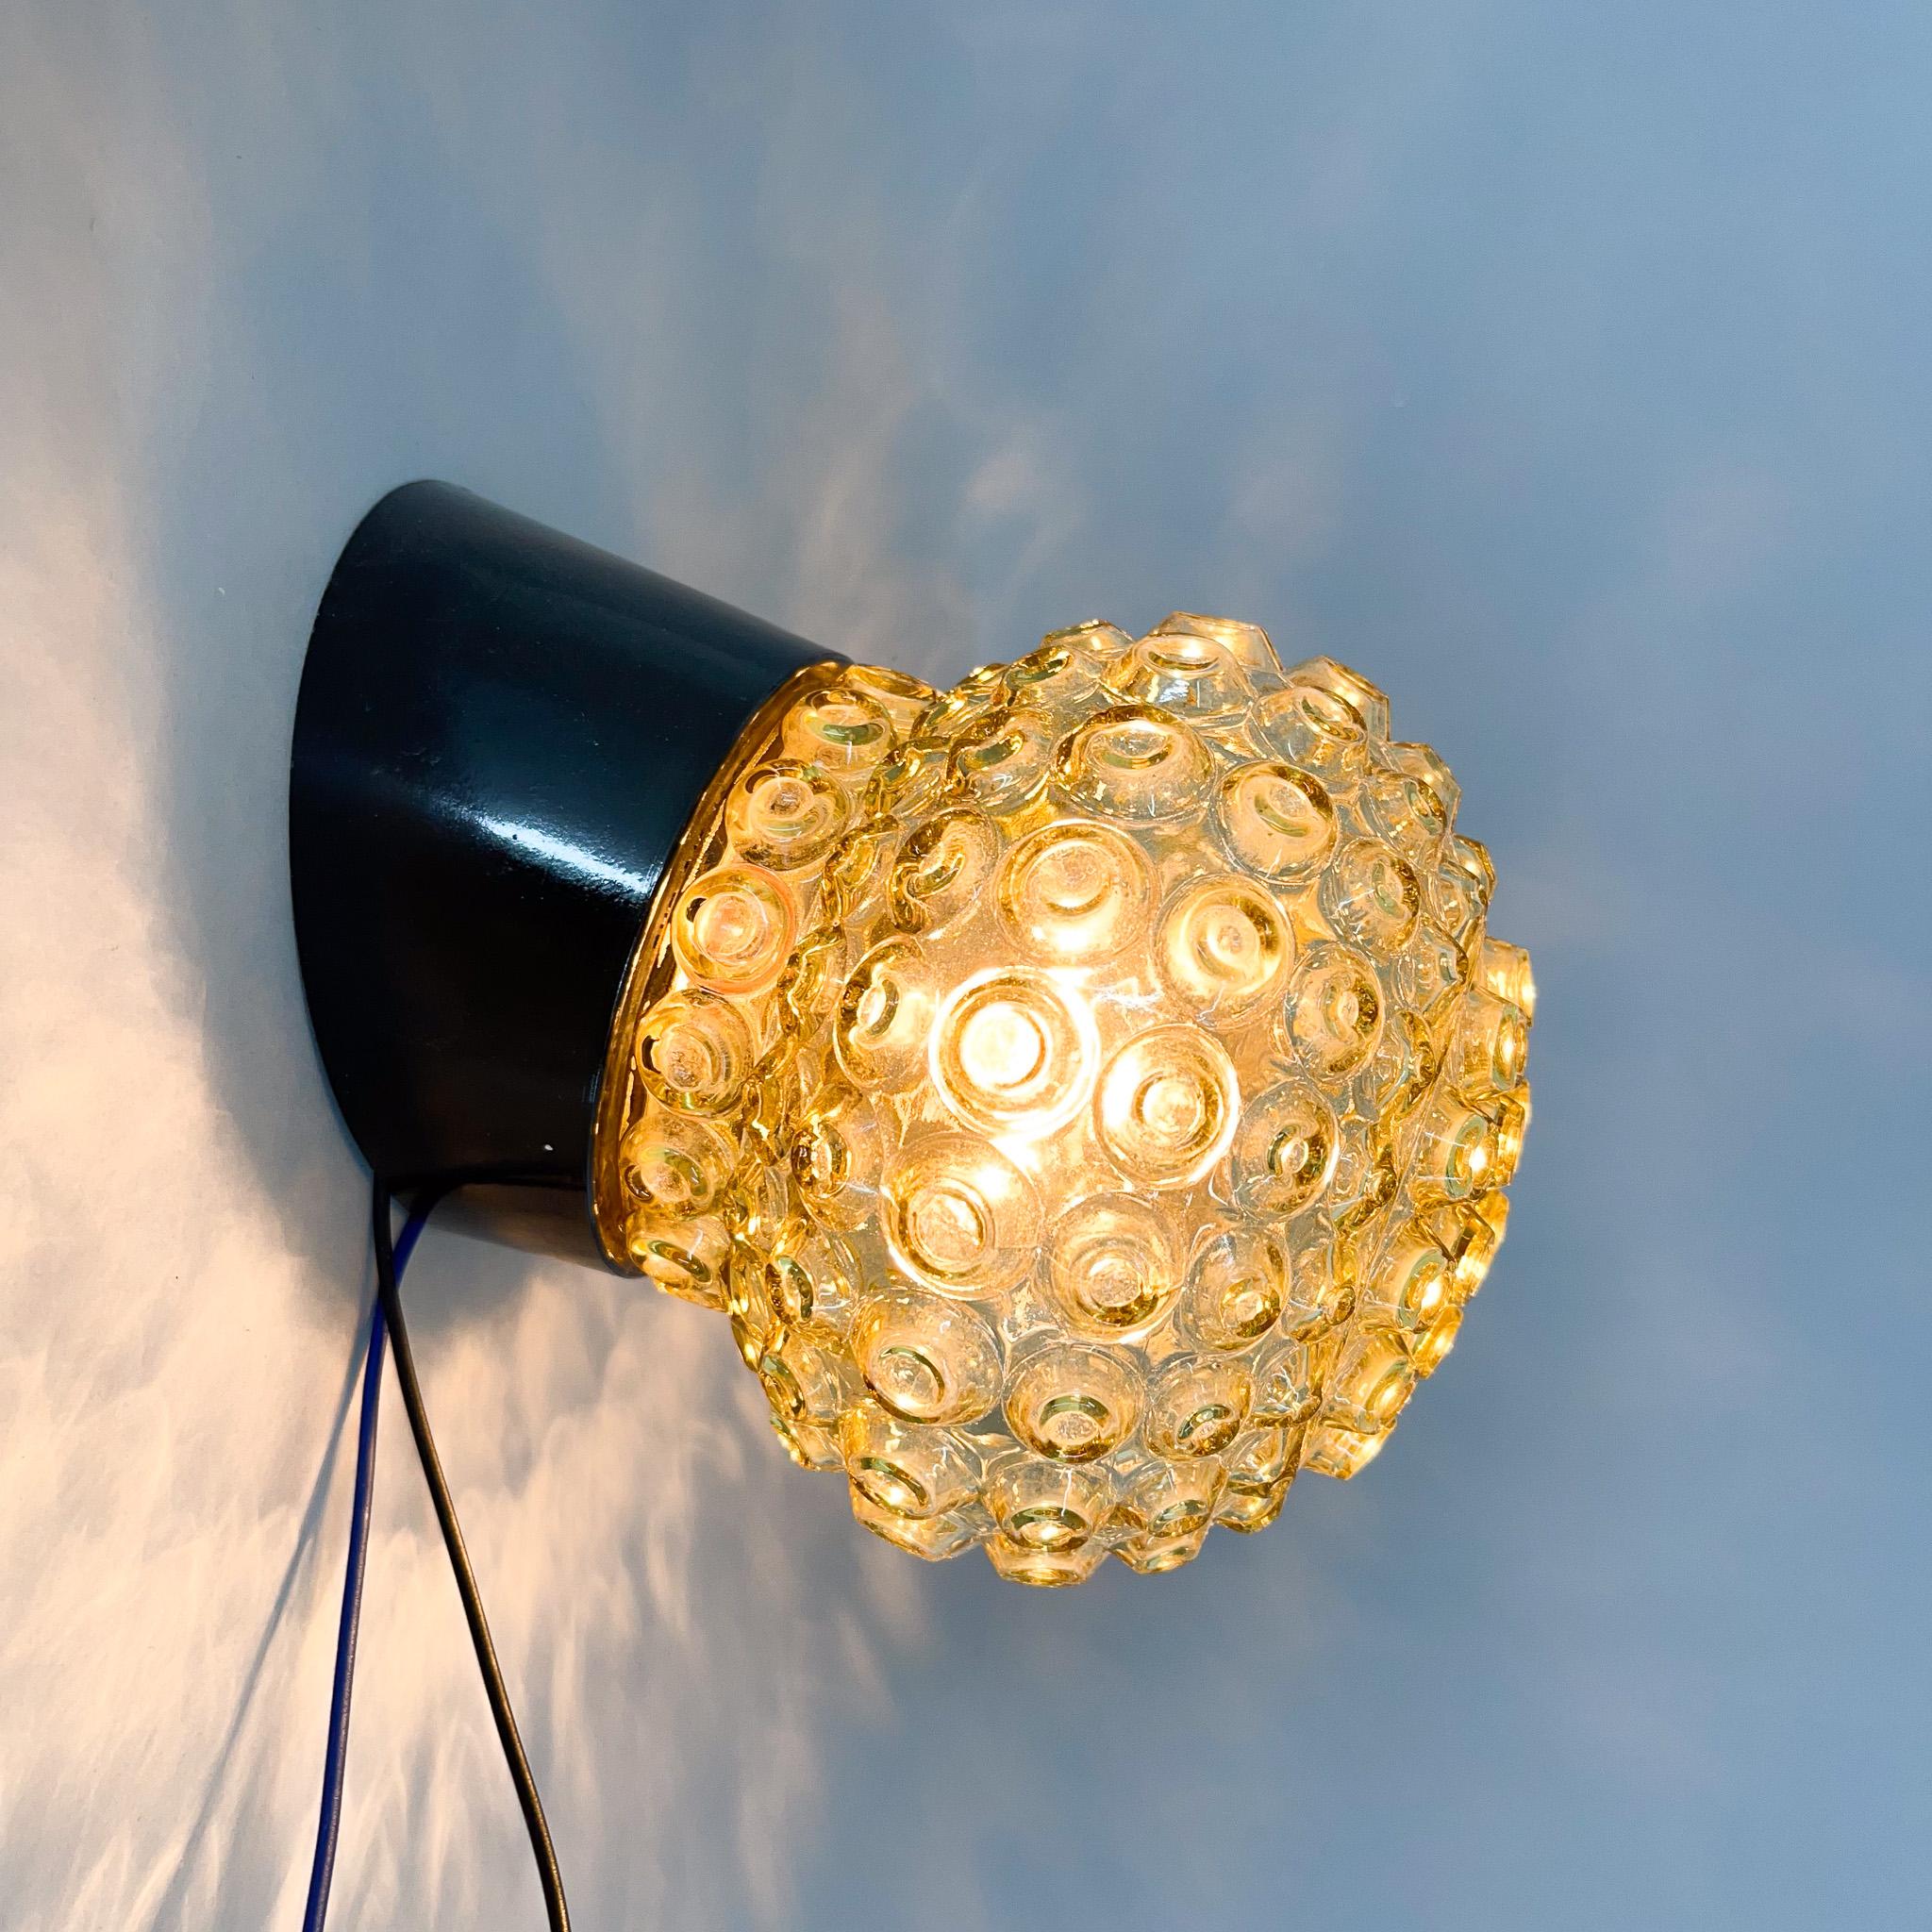 Vintage wall lamp made of bakelite and yellow pressed glass. New wiring. Four items available upon request.